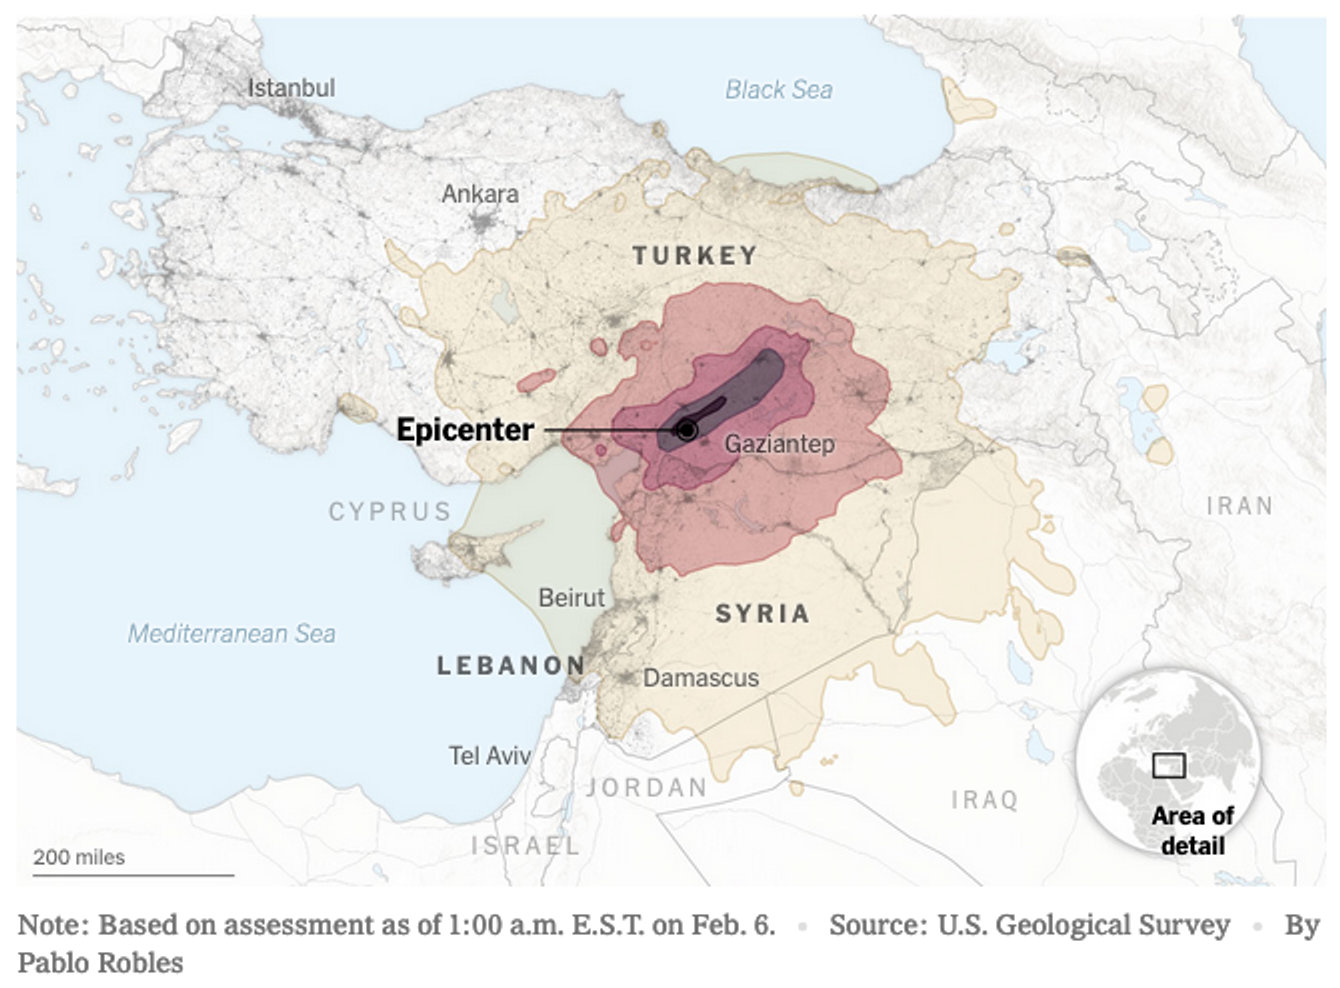 https://www.commondreams.org/media-library/map-of-syria-and-turkey-where-earthquake-hit.png?id=32983632&width=1340&quality=80